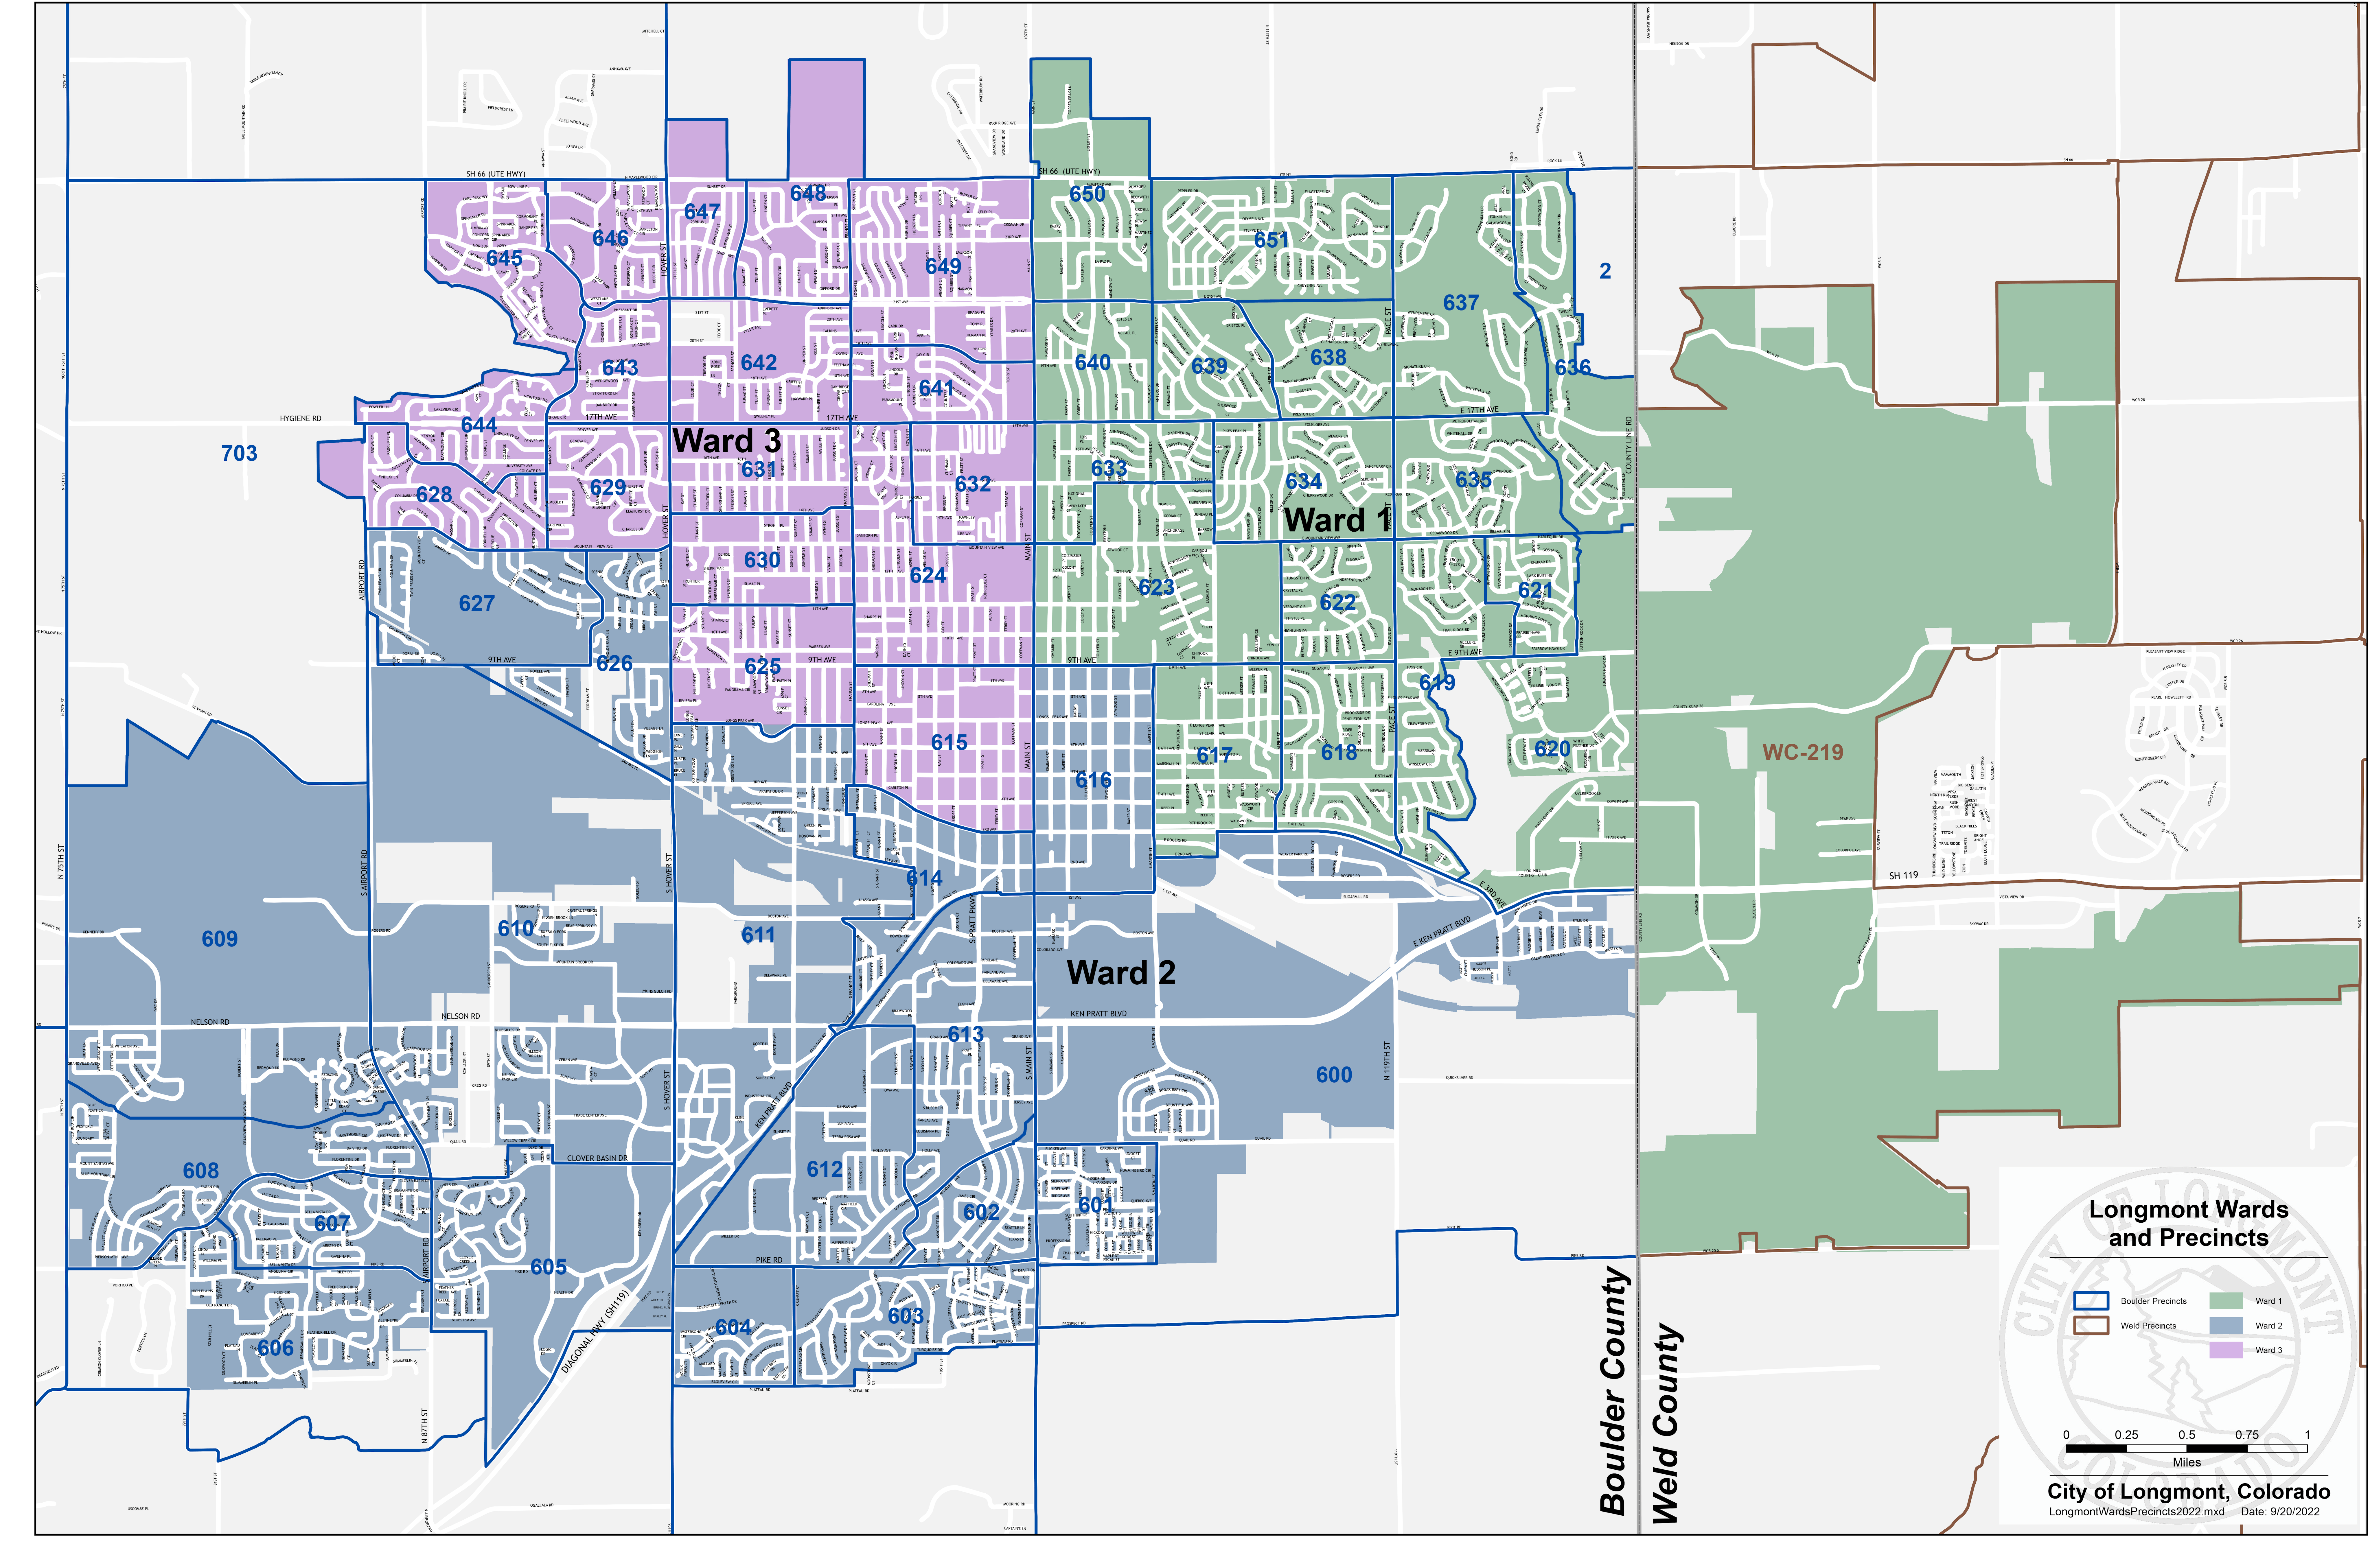 2022 Longmont Wards and Precincts